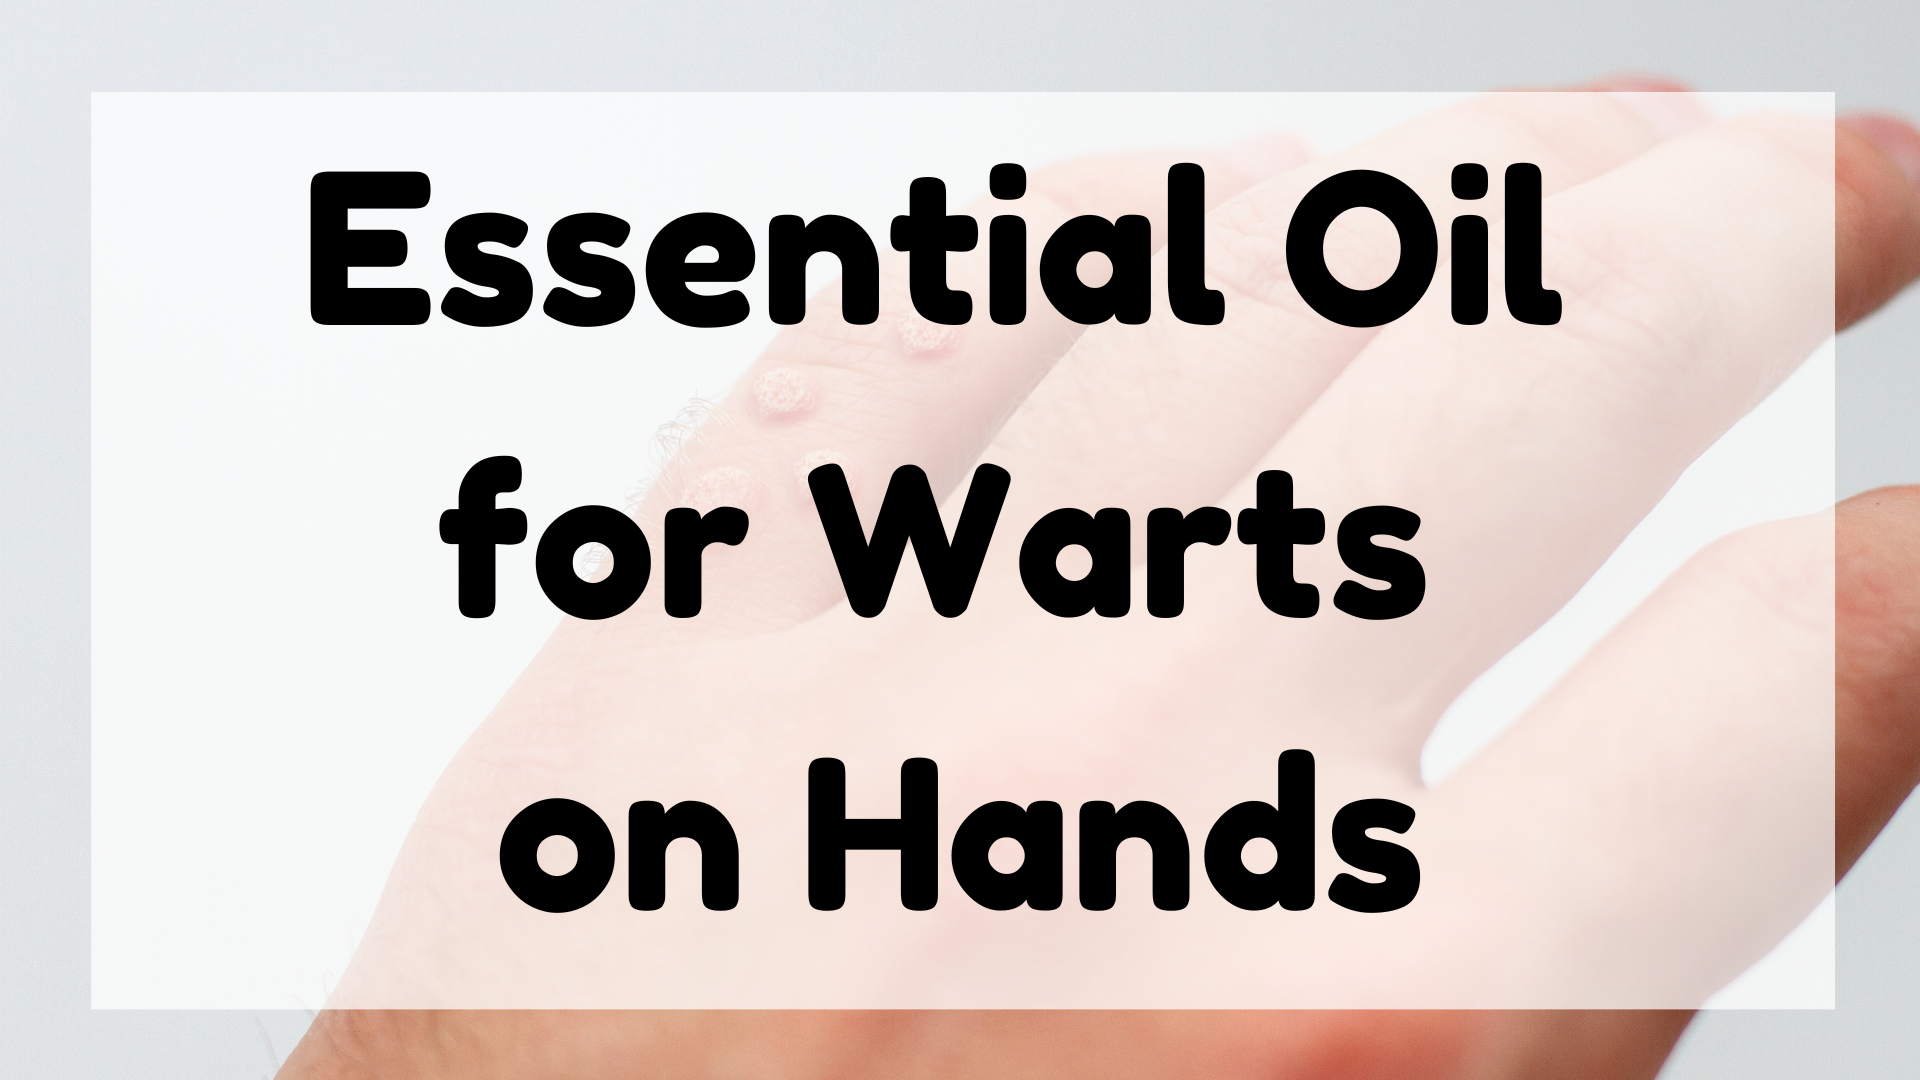 Essential Oil for Warts on Hands featured image